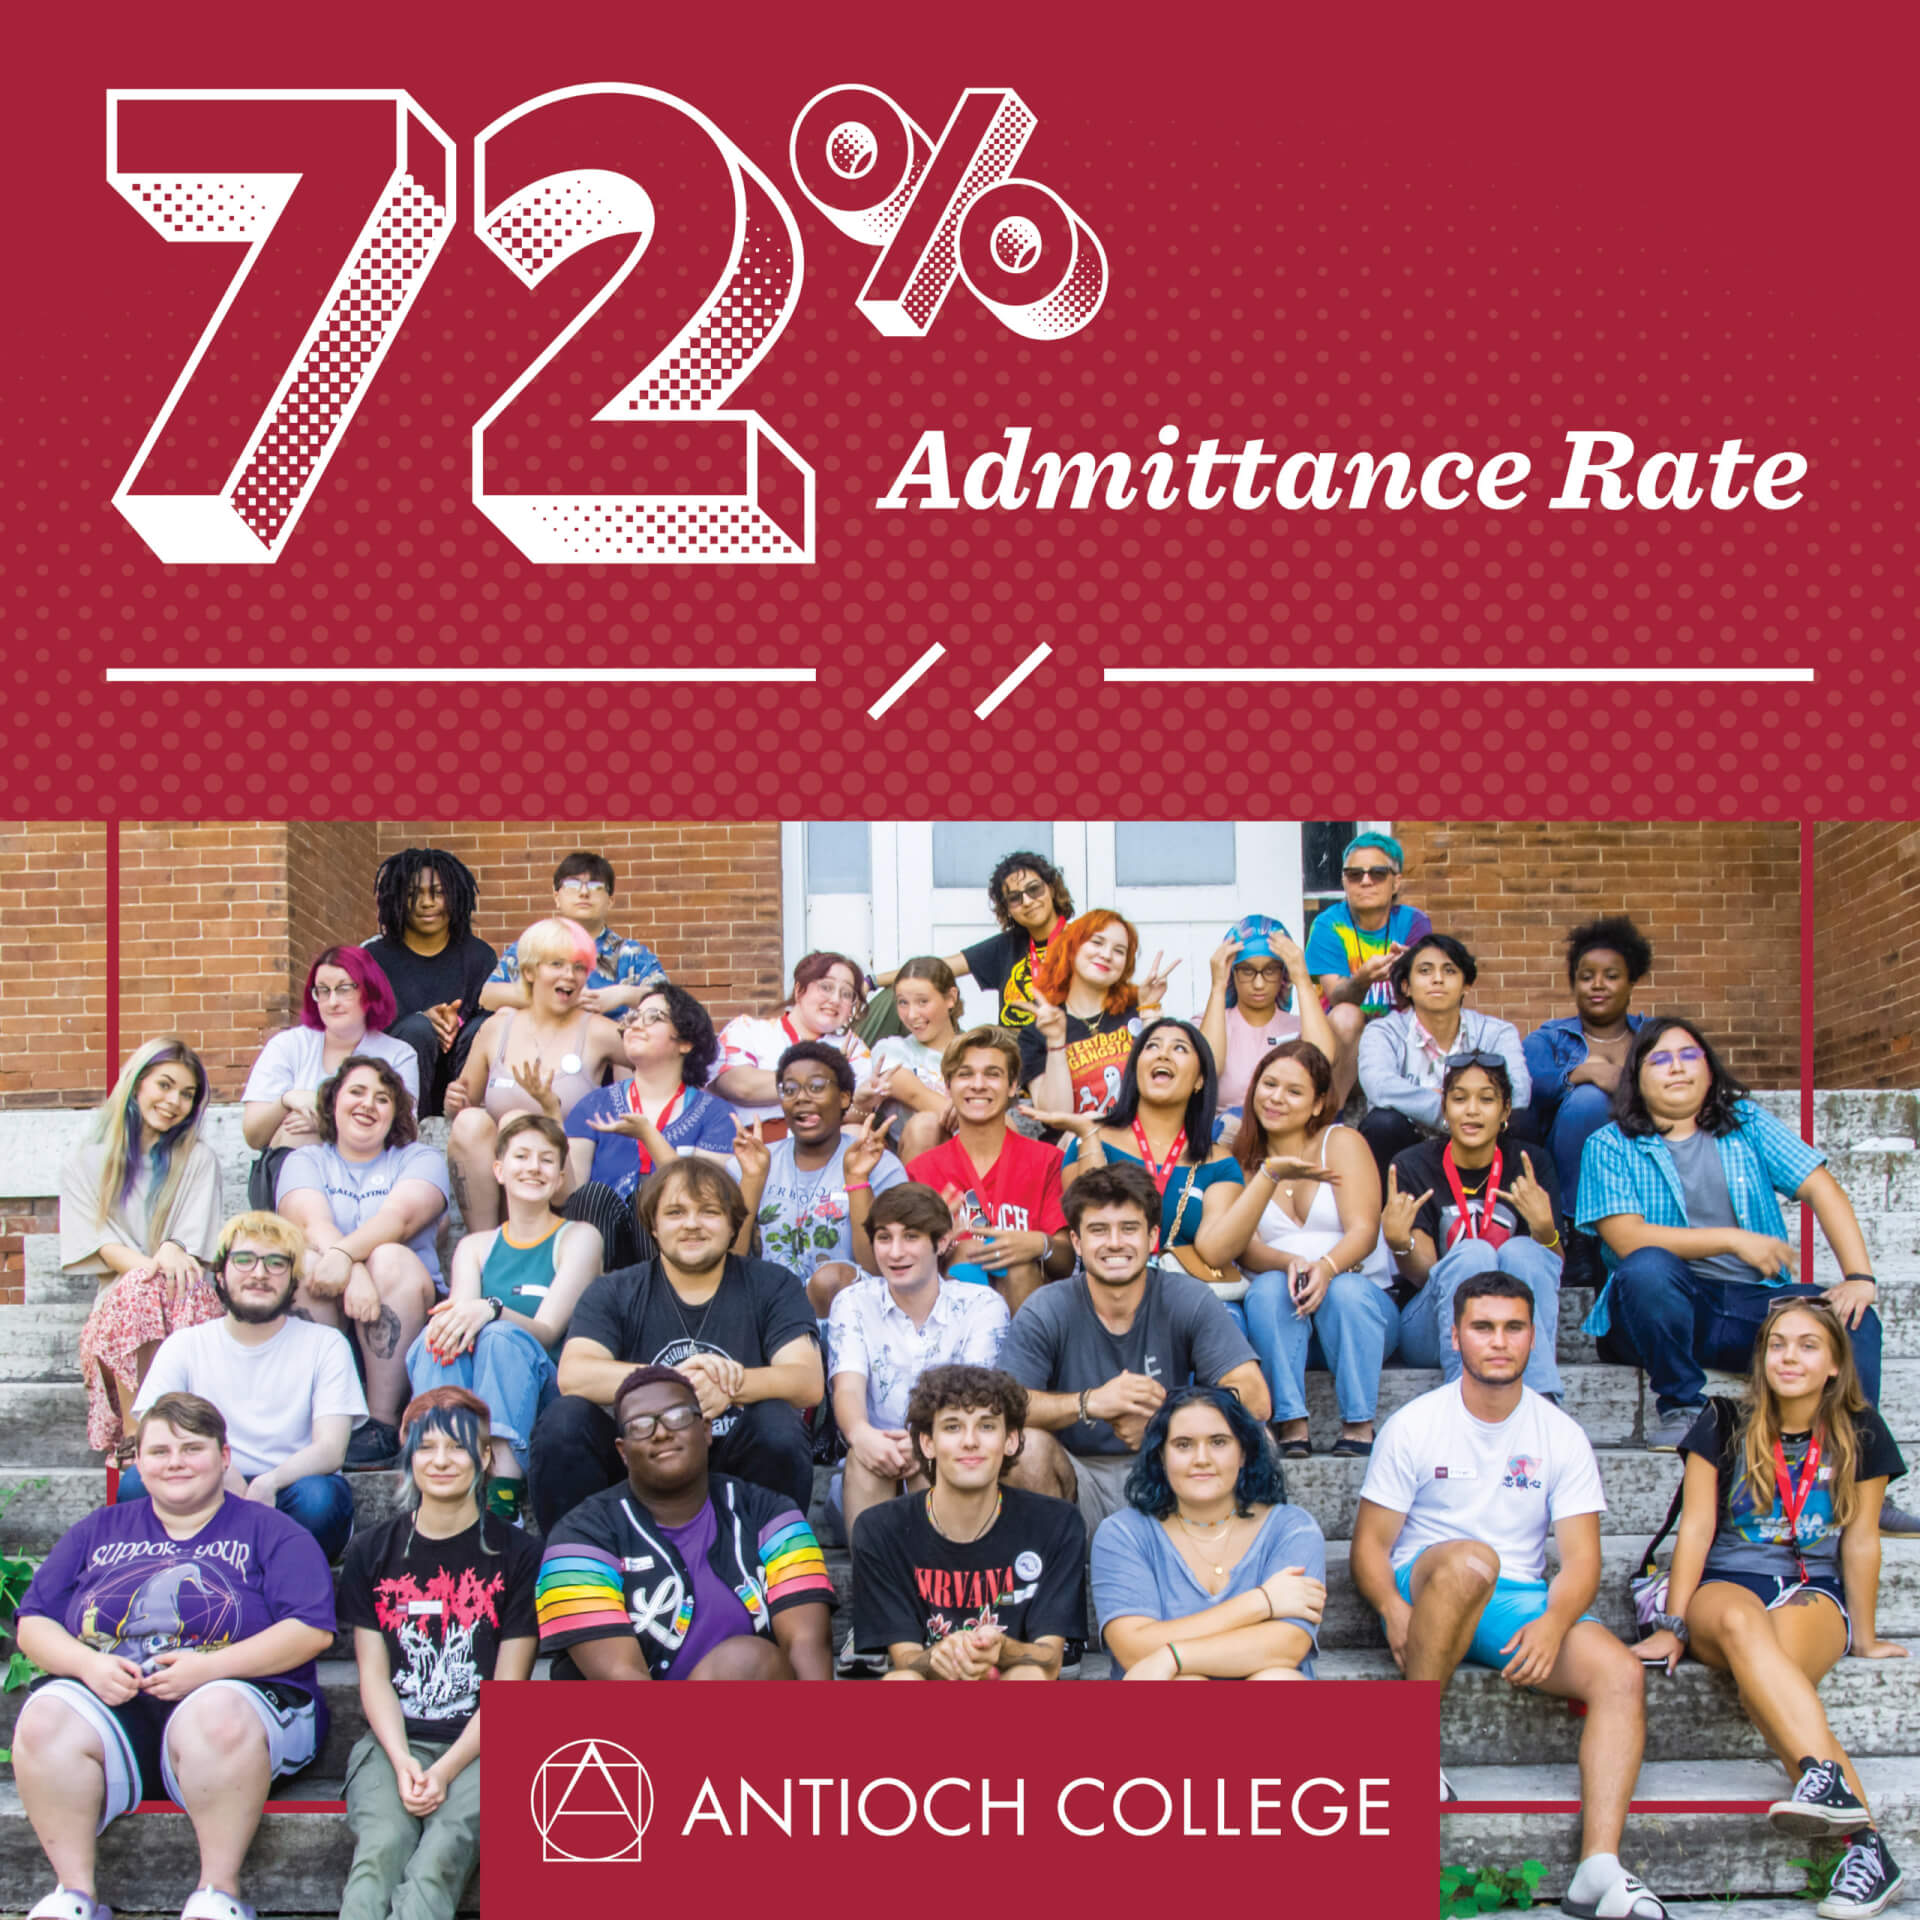 72% Admittance Rate